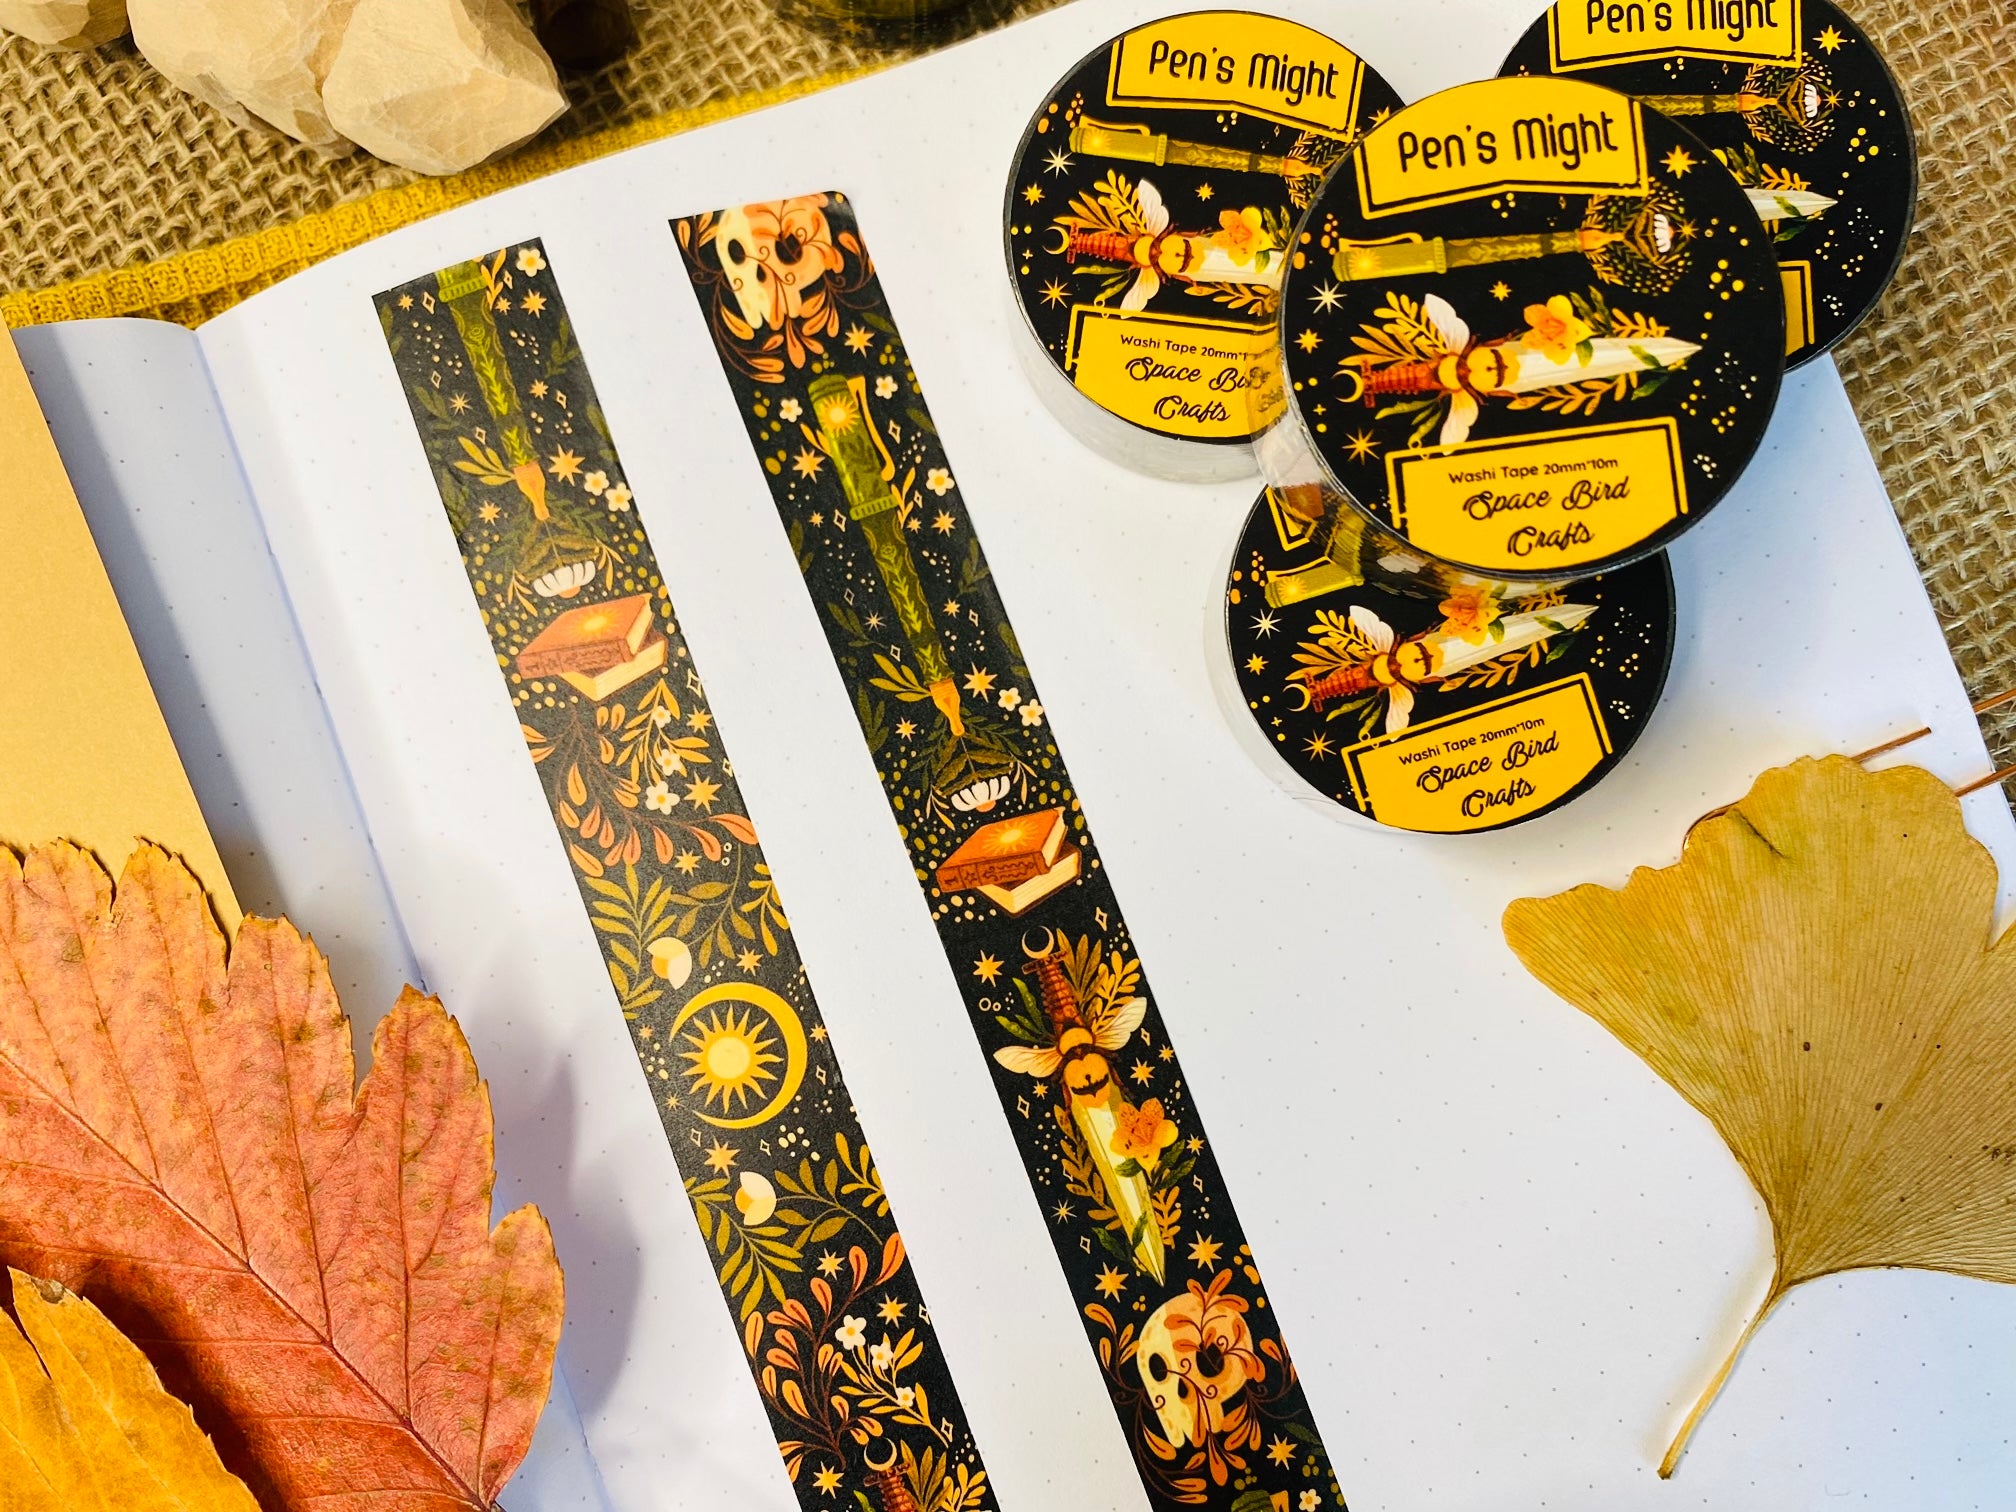 Sweater Weather washi tape with Gold Foil - Autumn Washi Tape